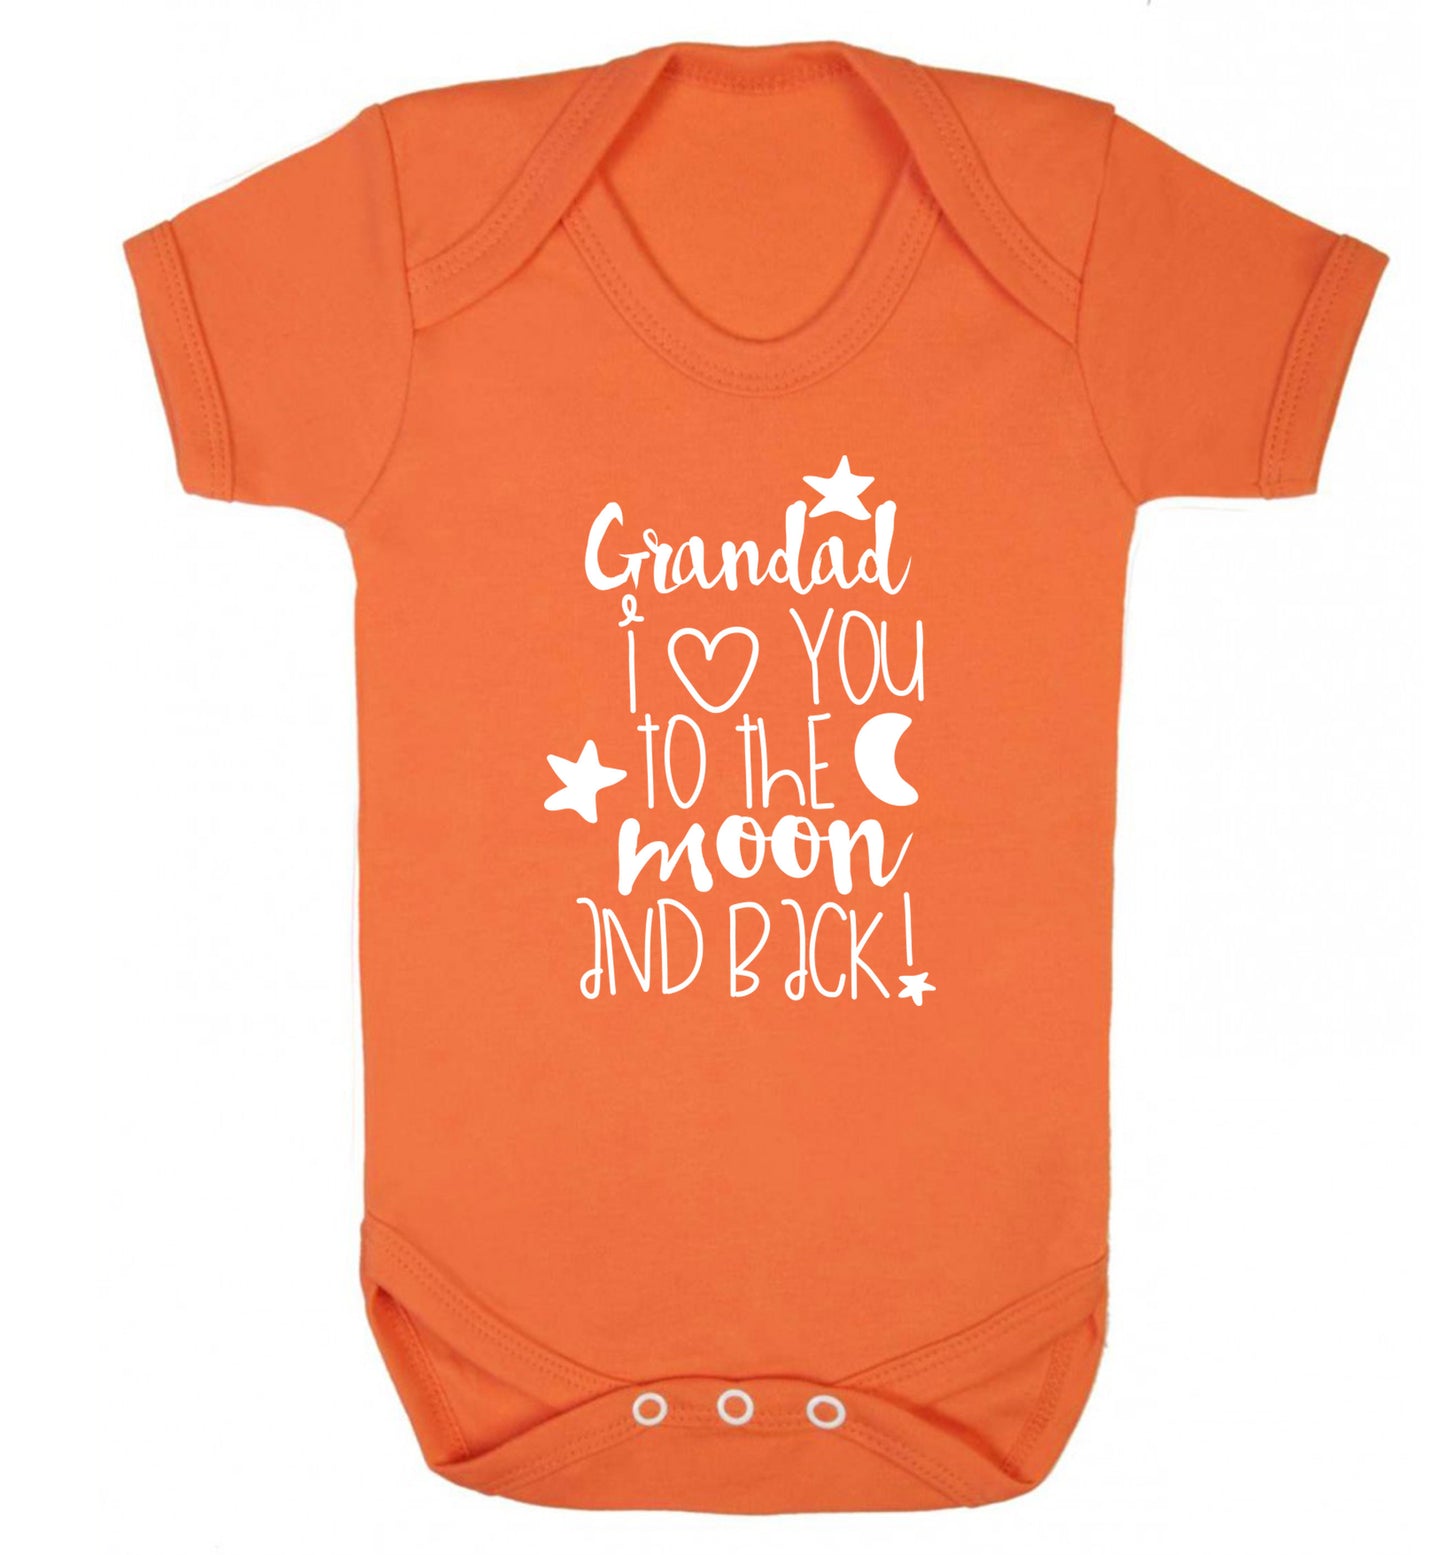 Grandad's I love you to the moon and back Baby Vest orange 18-24 months